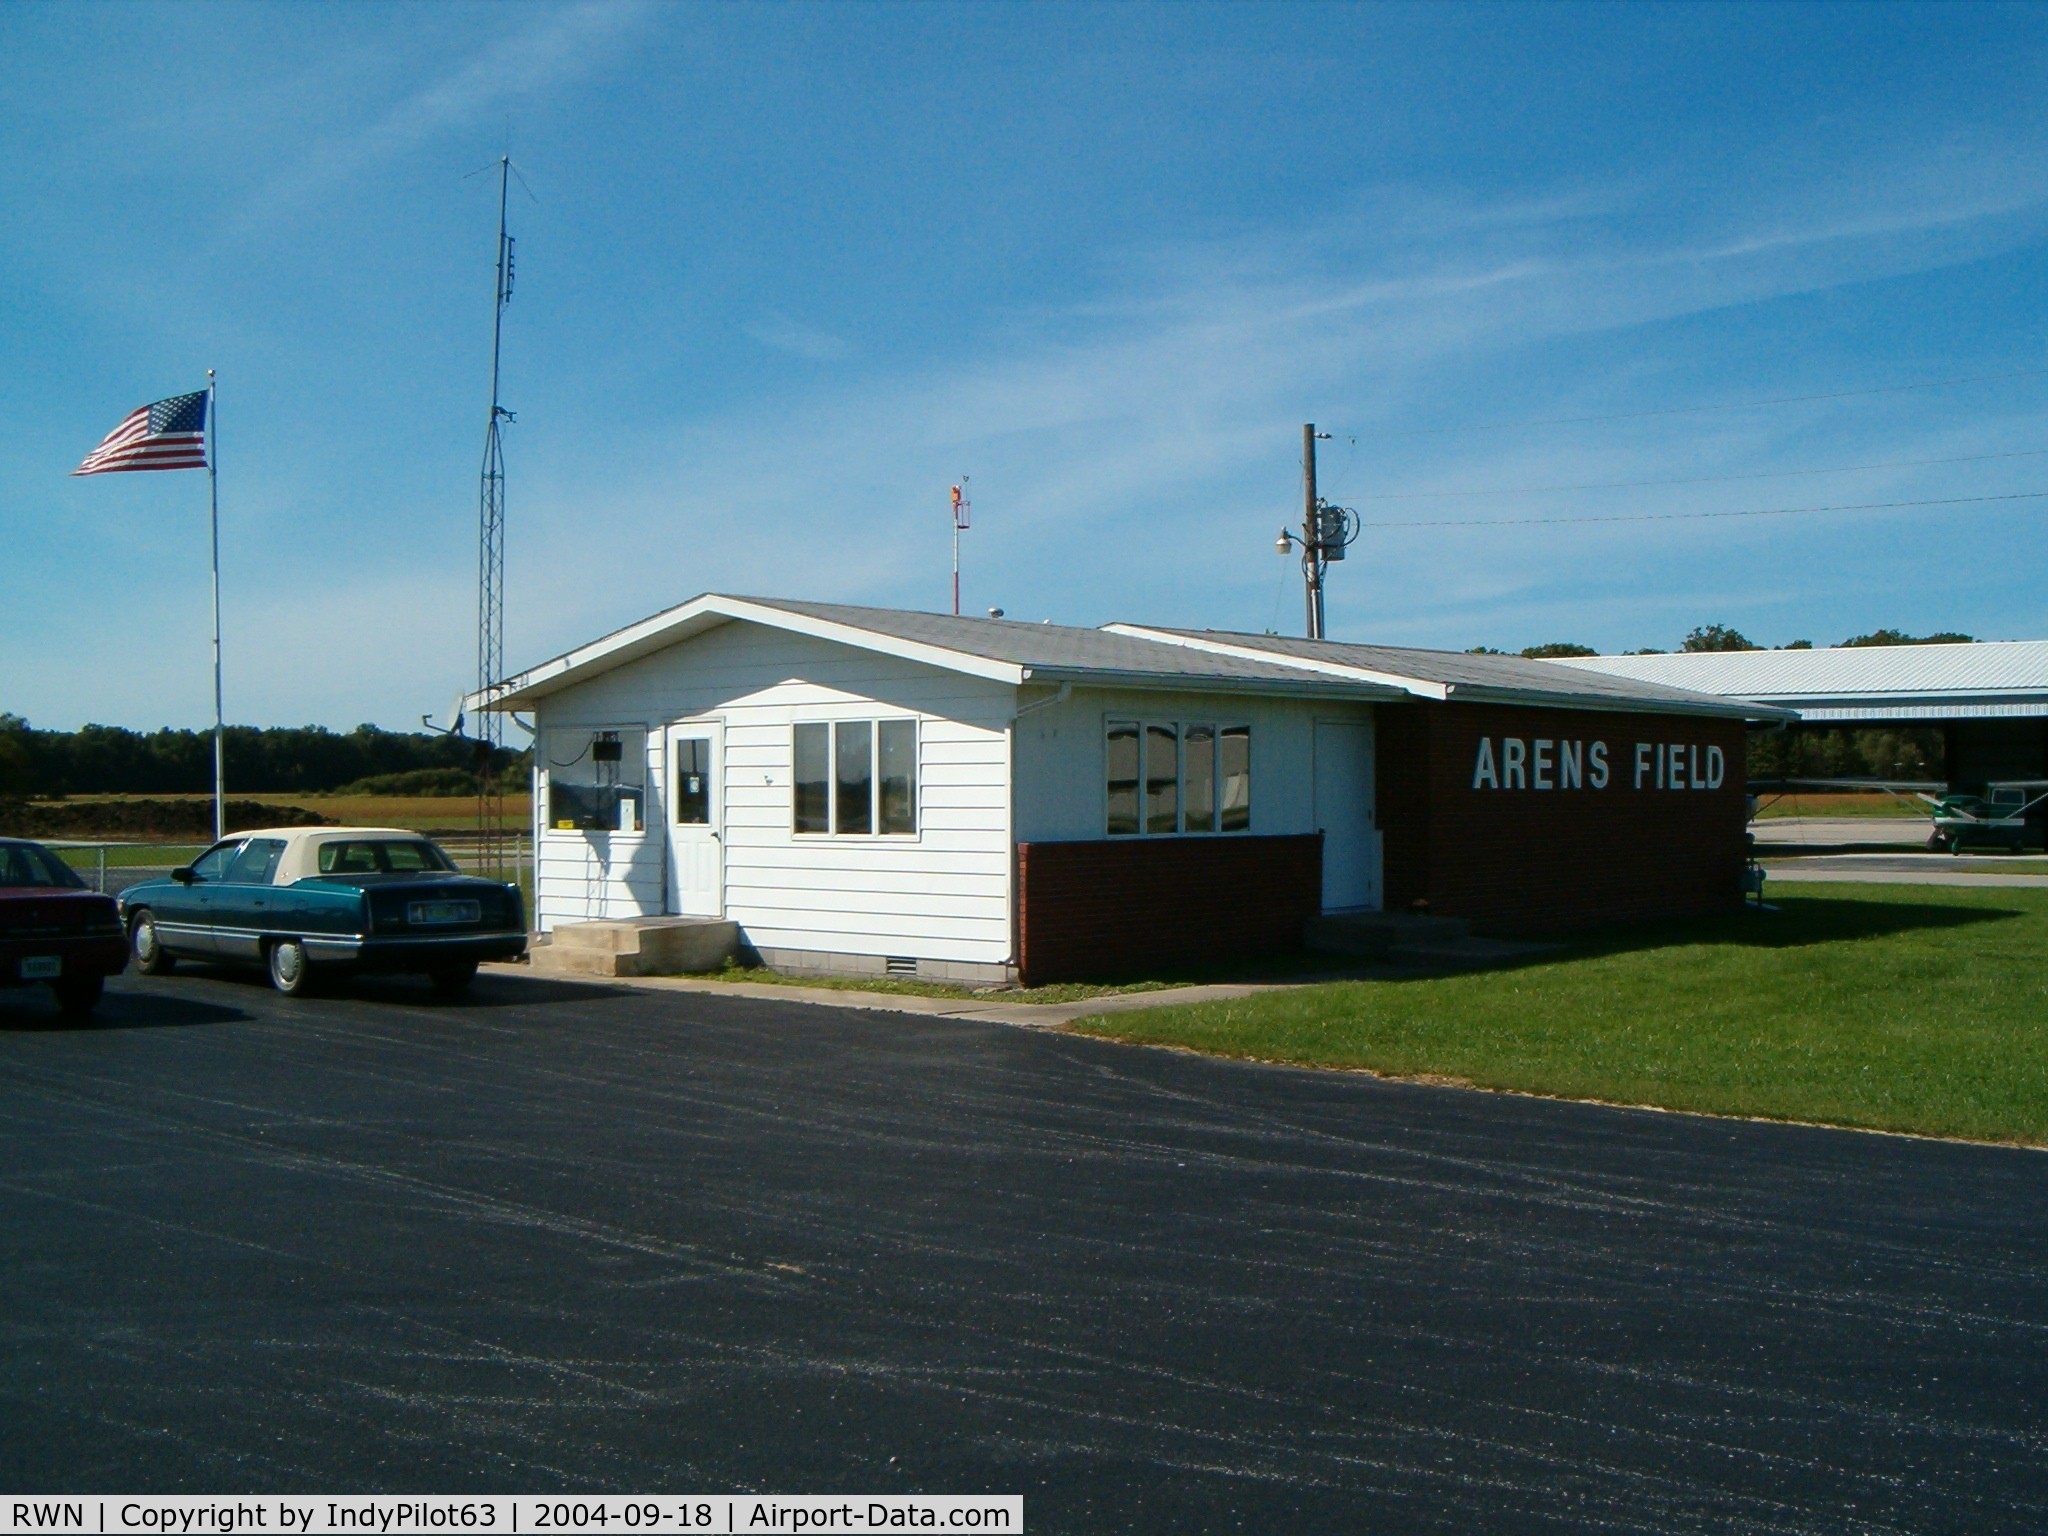 Arens Field Airport (RWN) - Driving by on the way up to Knox County